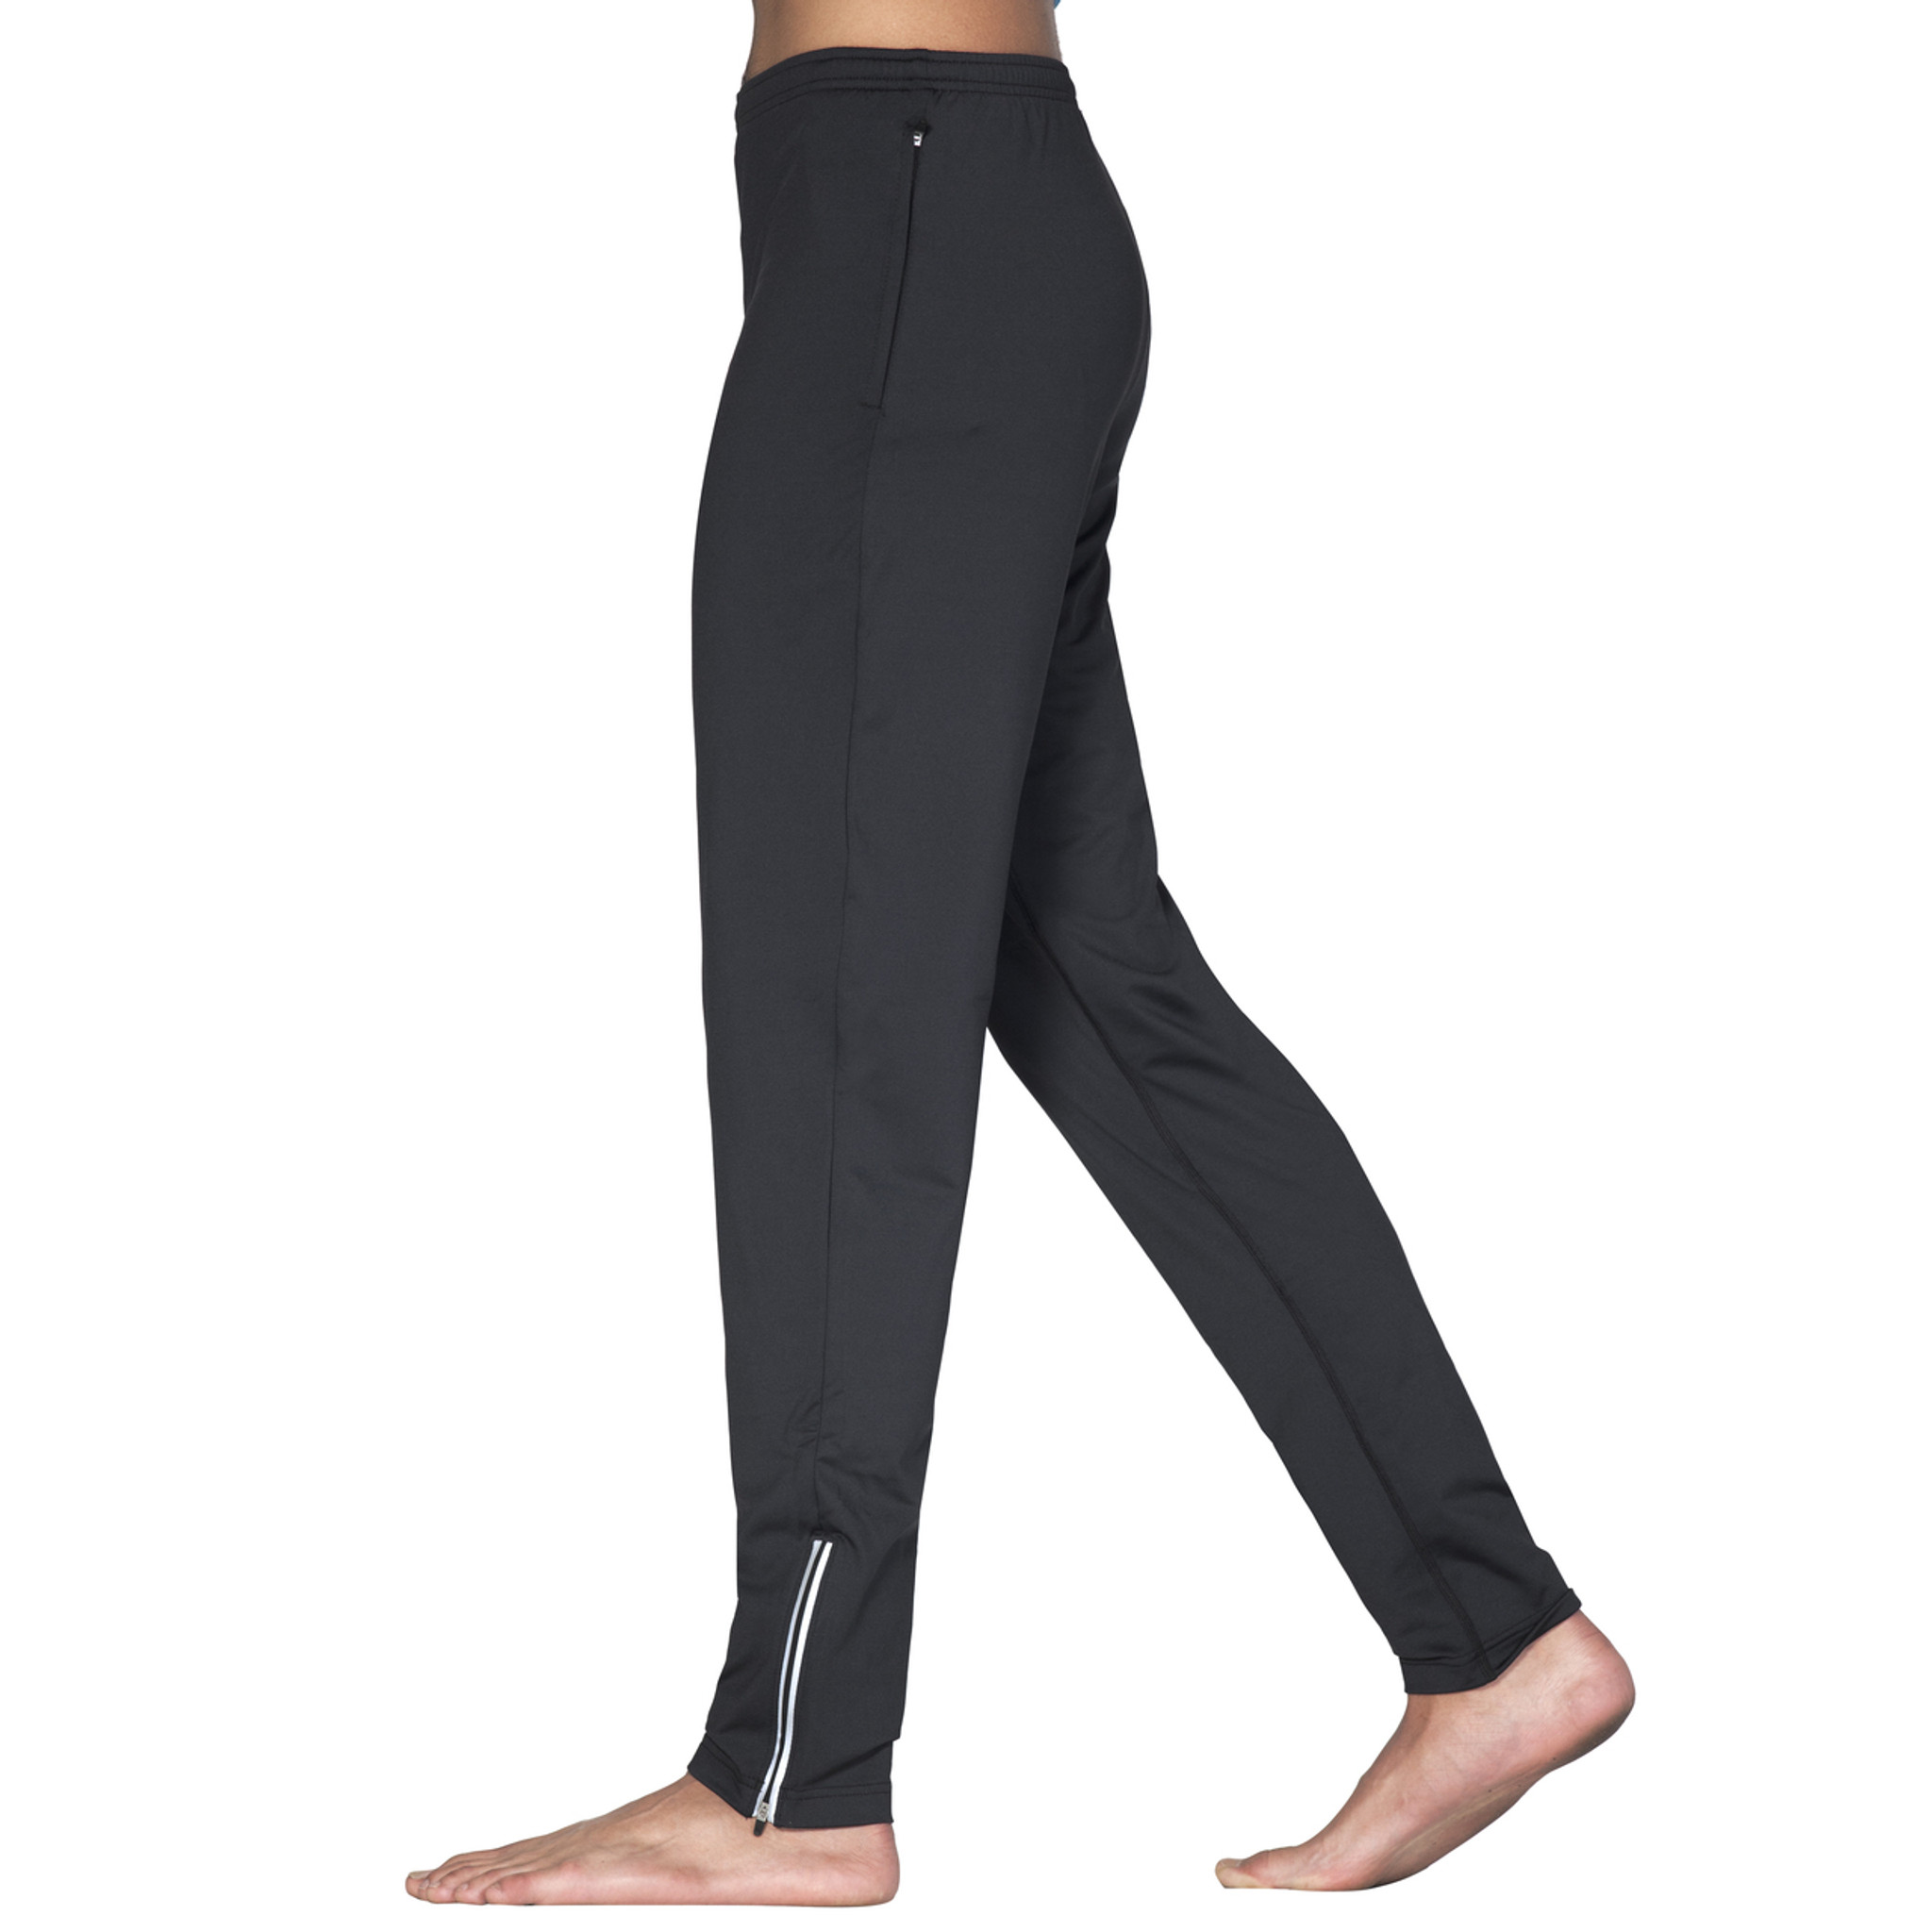 Yoga Pants vs. Leggings: What's the difference? - The Yoga Nomads